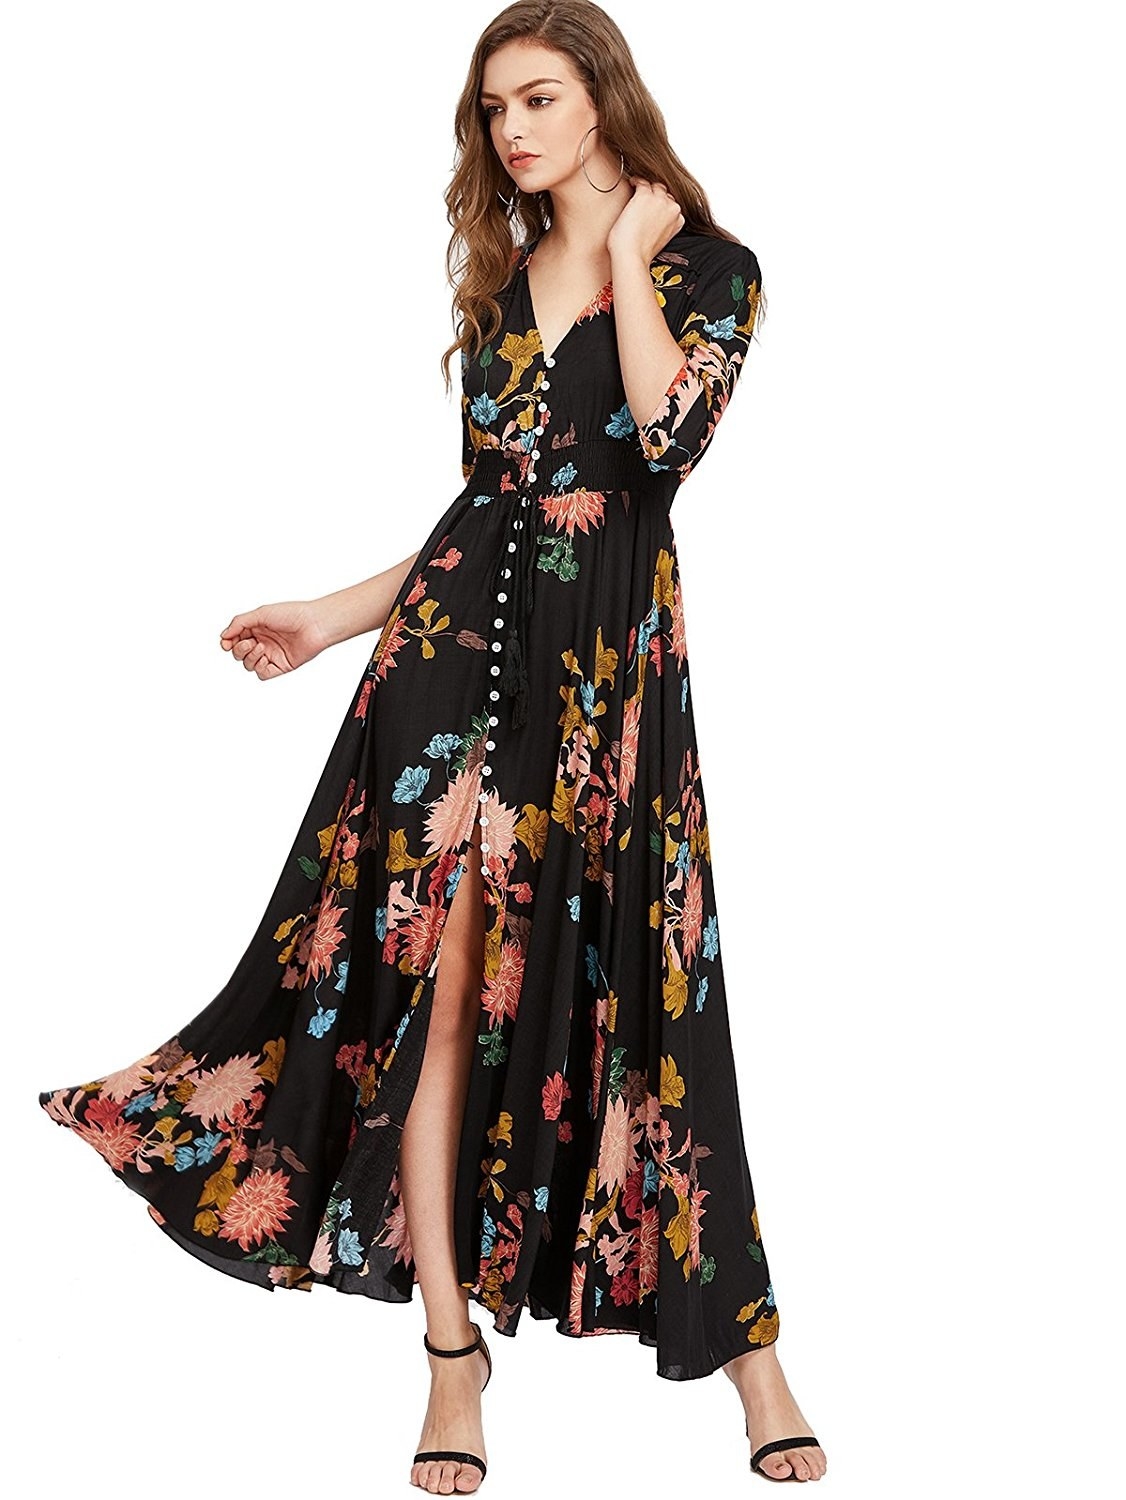 11 Gorgeous Dresses That Deserve To Be Danced In